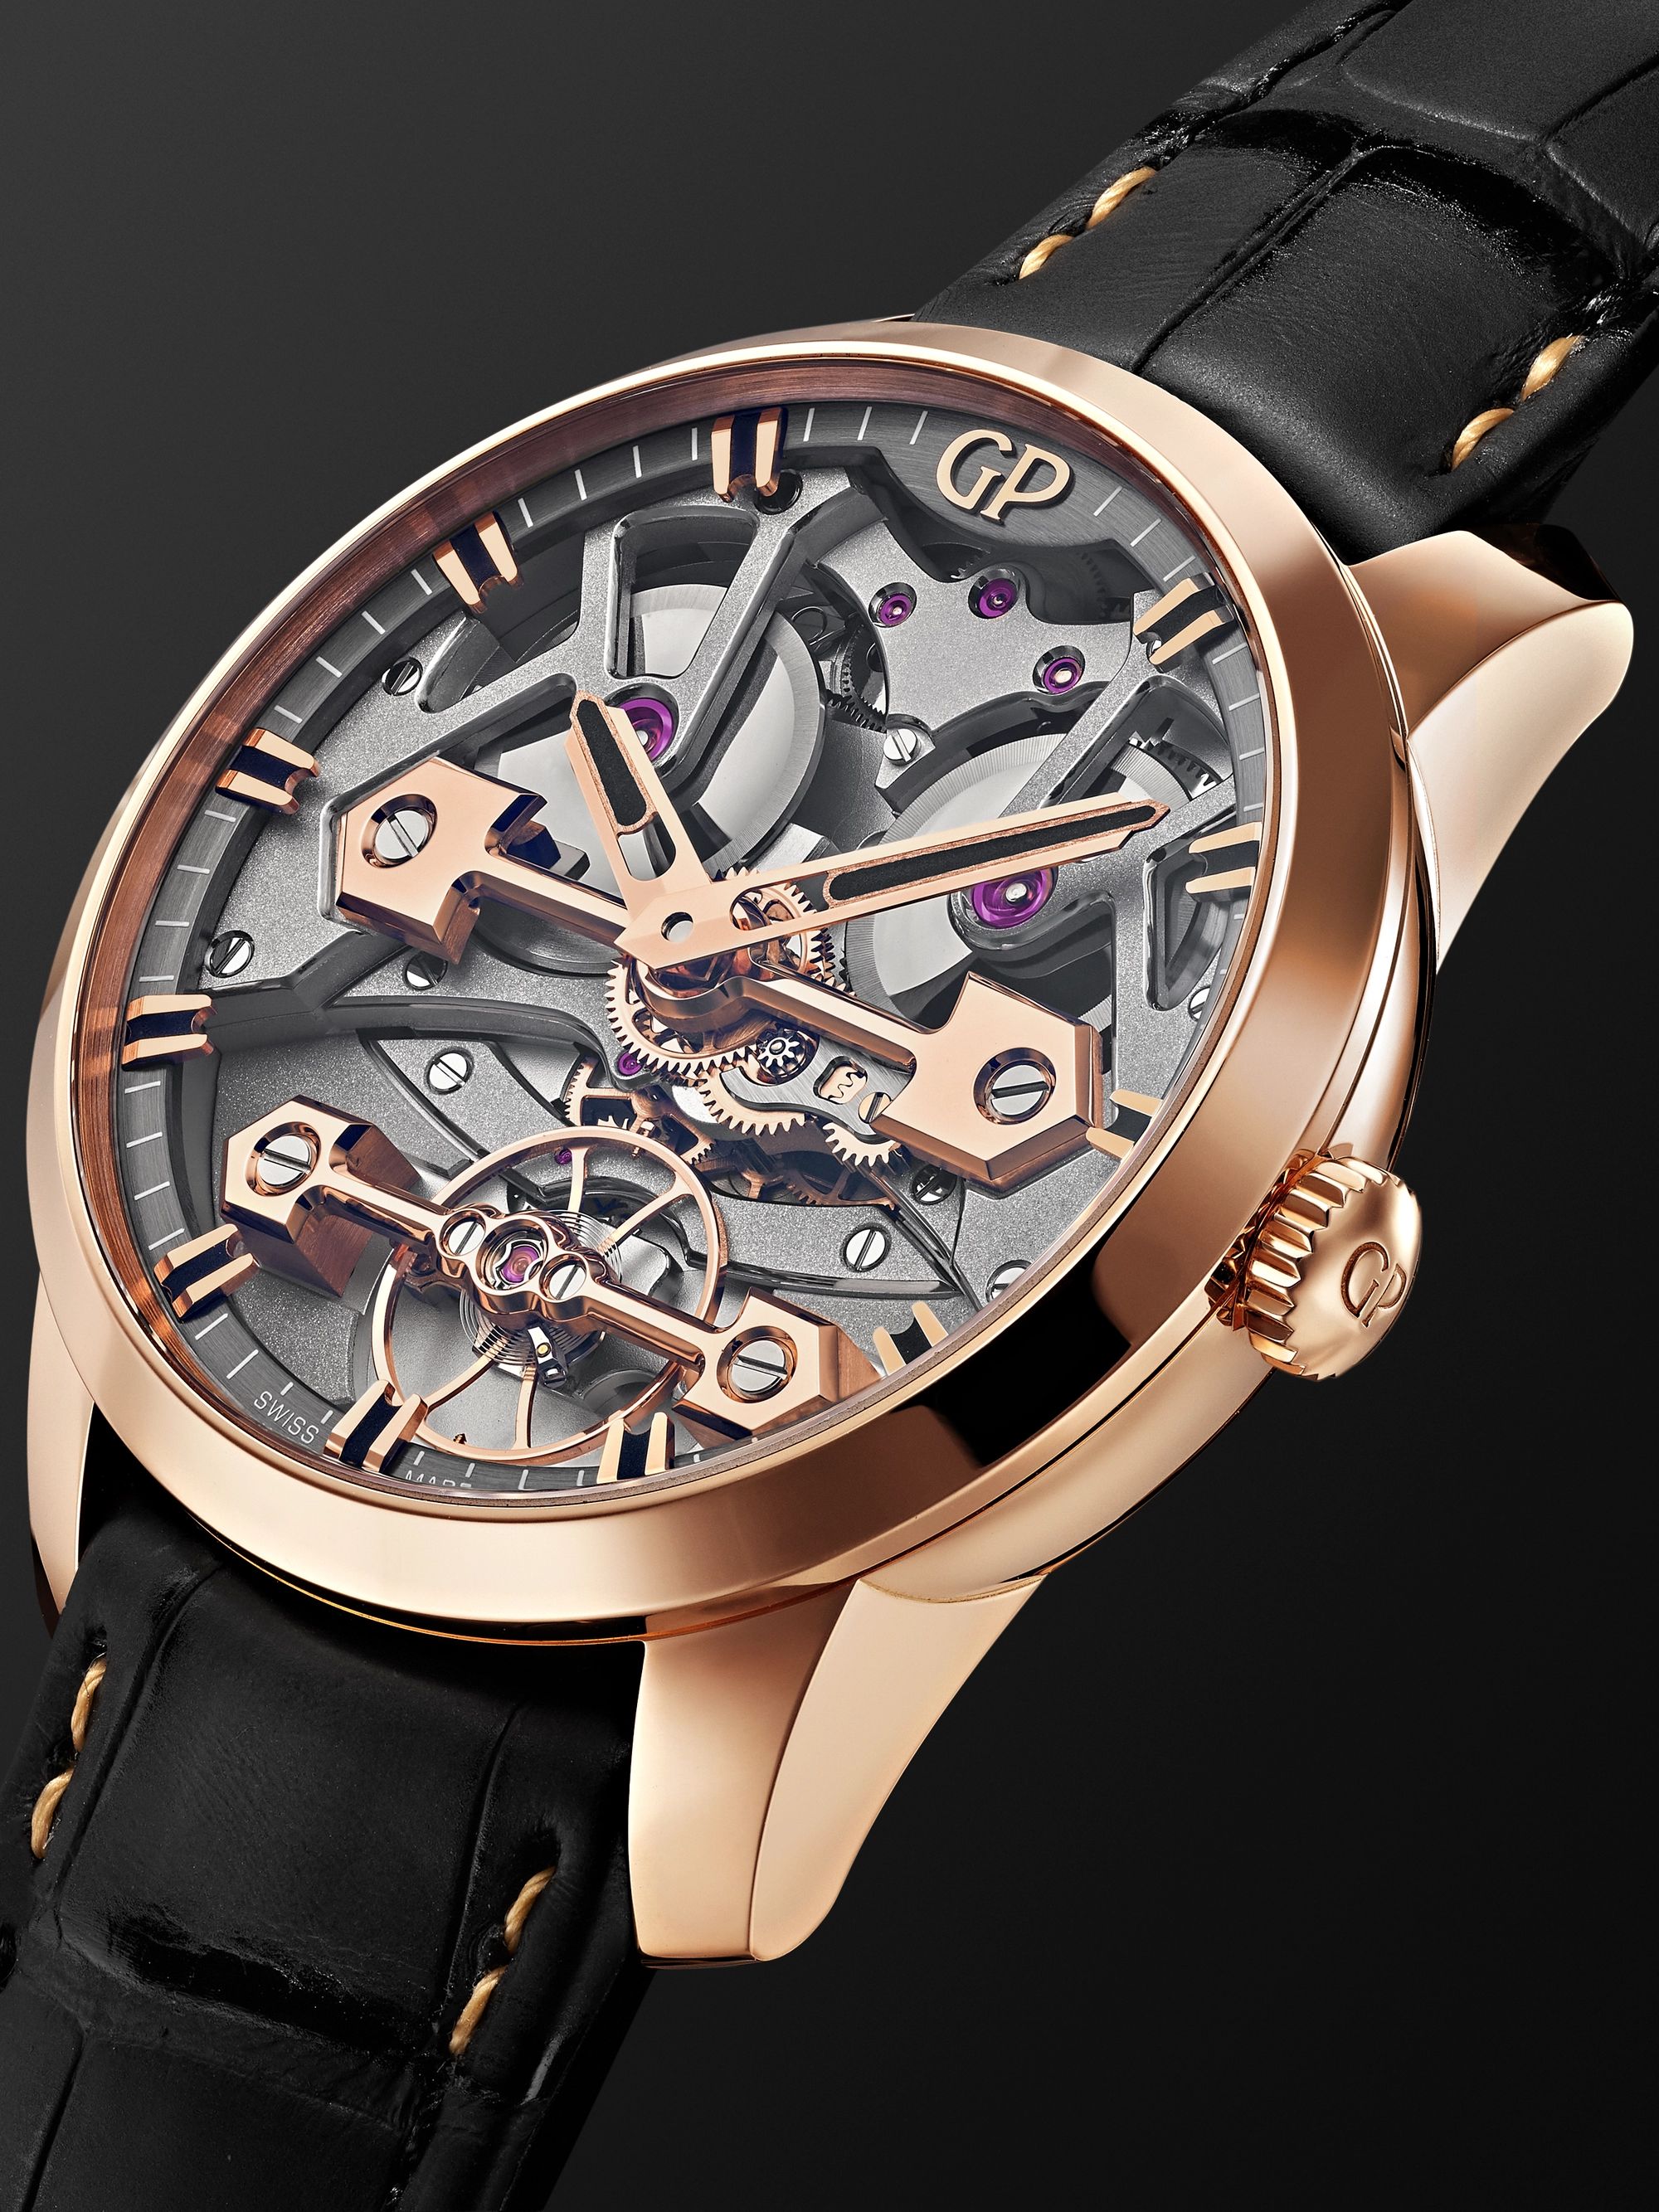 GIRARD-PERREGAUX Classic Bridges Limited Edition Automatic Skeleton 40mm Pink Gold and Alligator Watch, Ref. No. 86005-52-002-BB6A